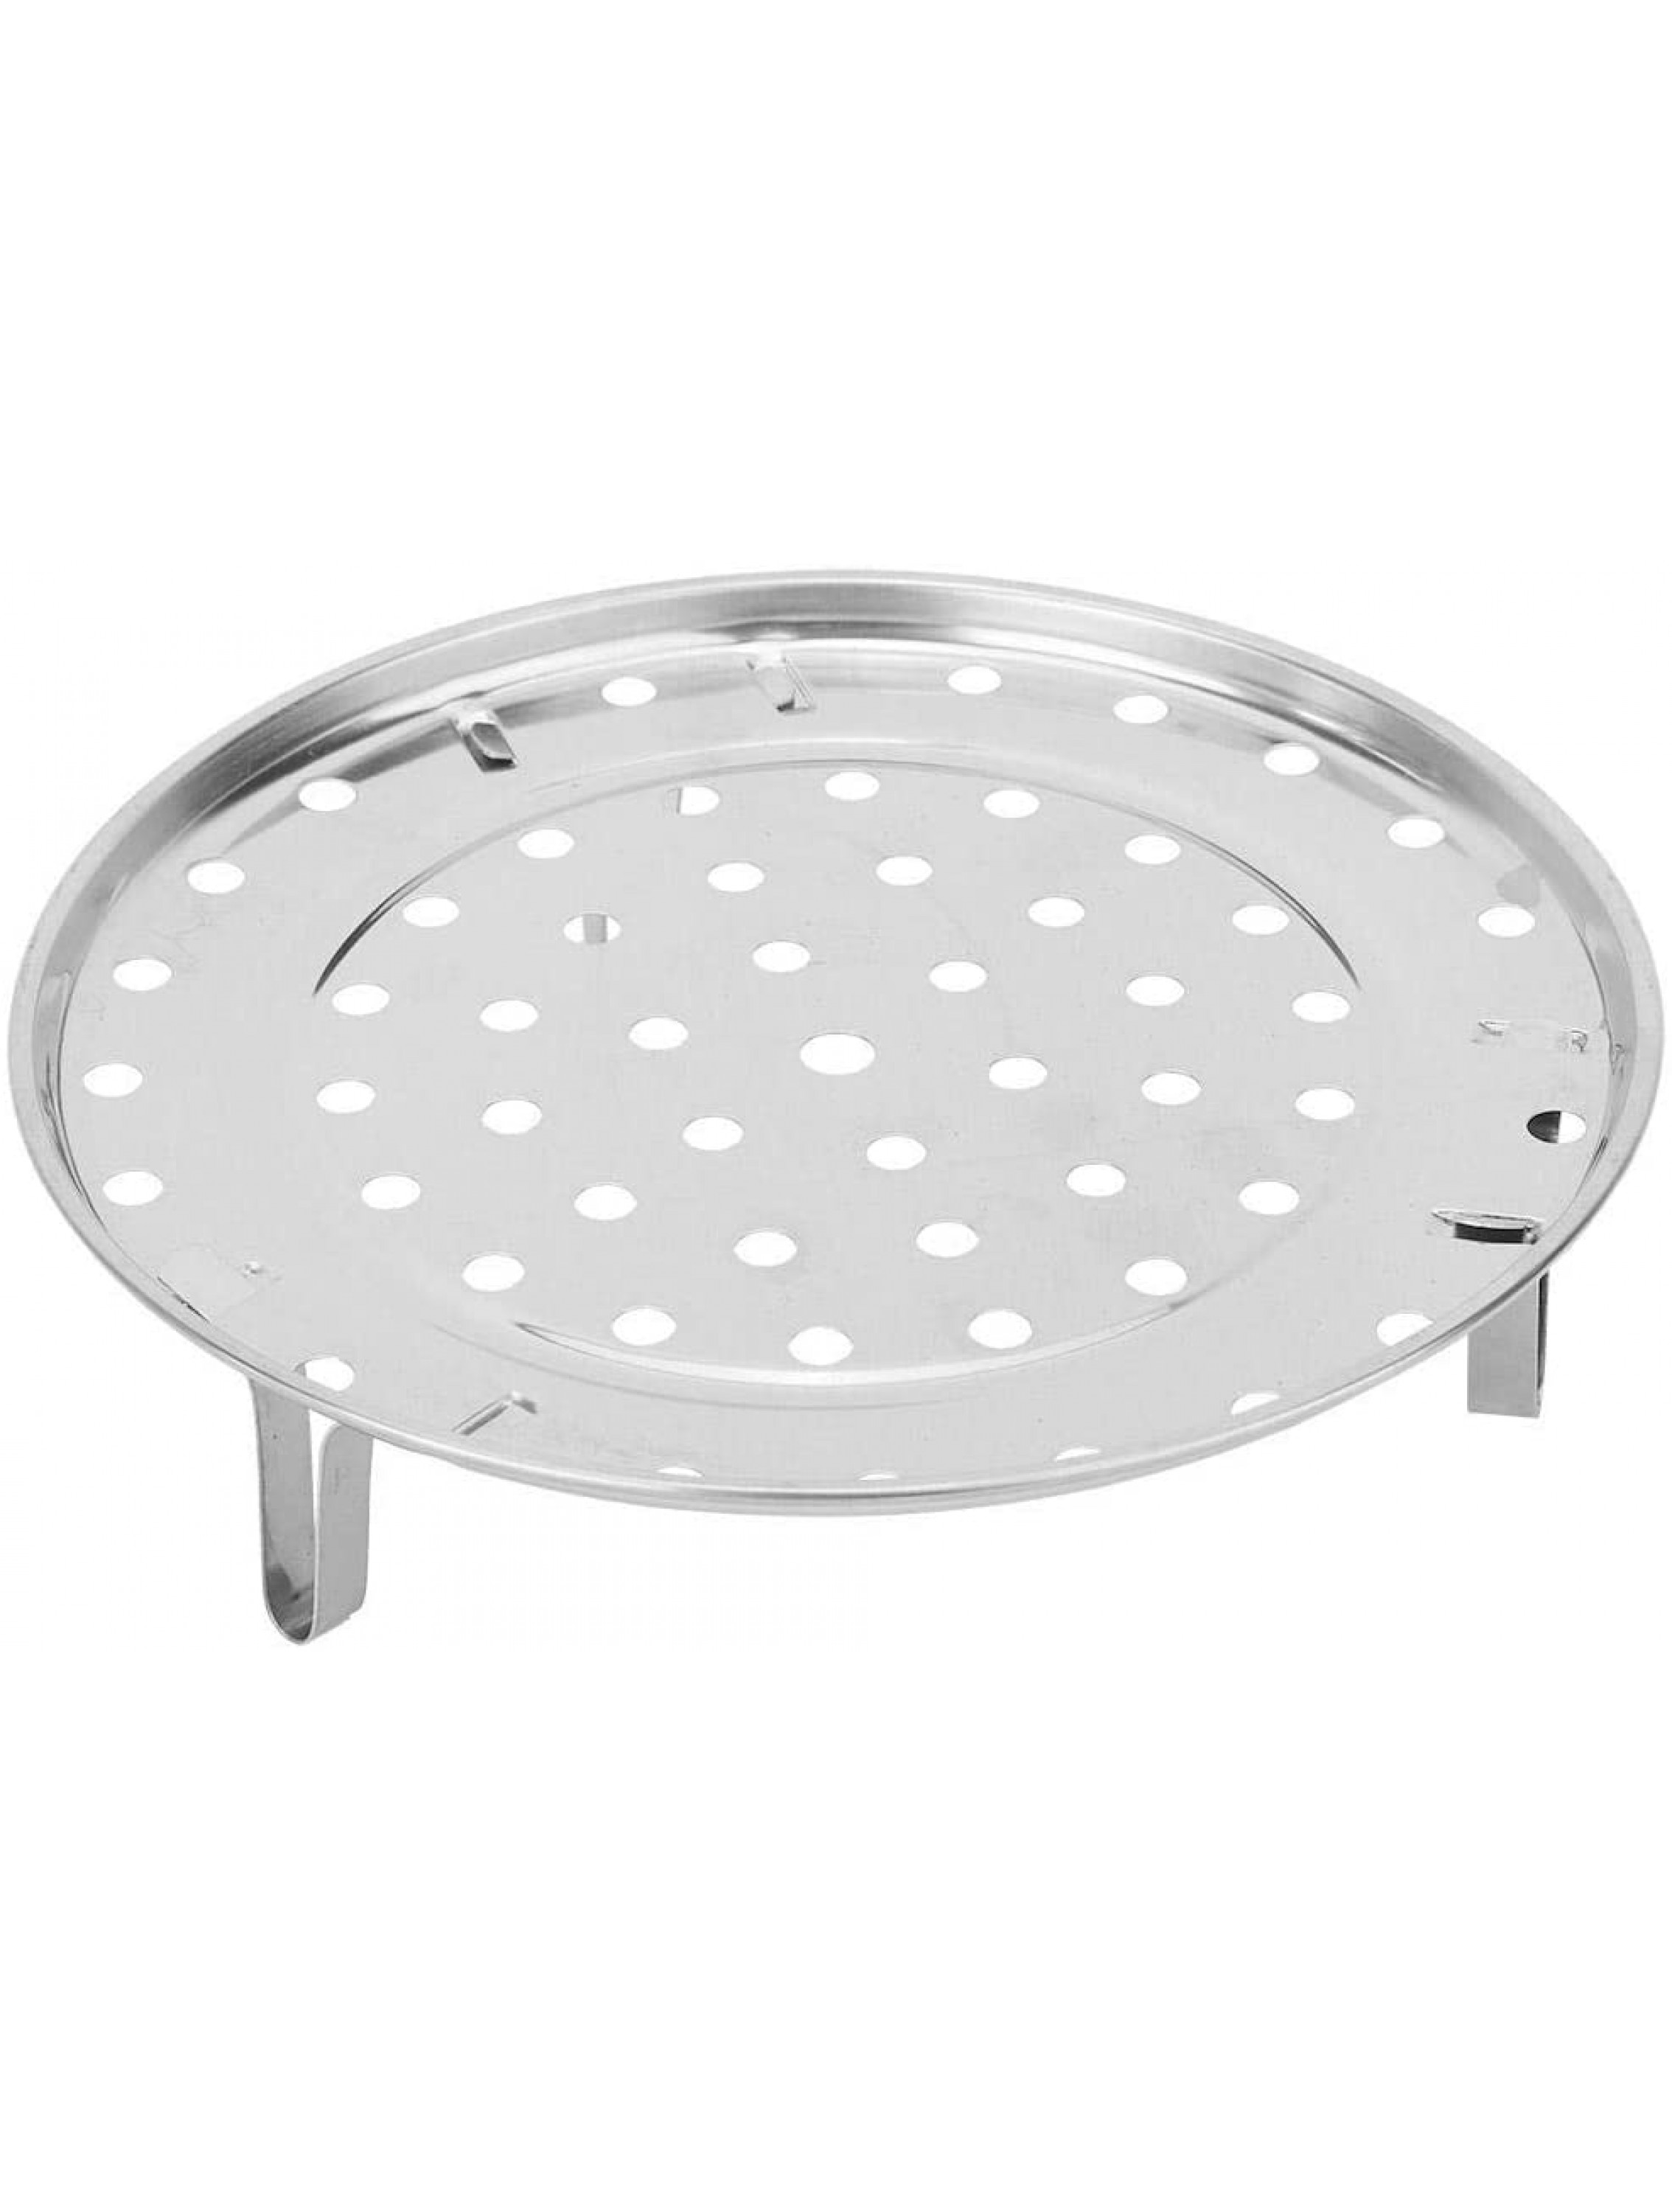 10in Steamer Rack Stainless Steel Canning Rack Cooking Wire Food Vegetable Steaming Tray for Pressure Cooker Canners - BKFEK1QFB